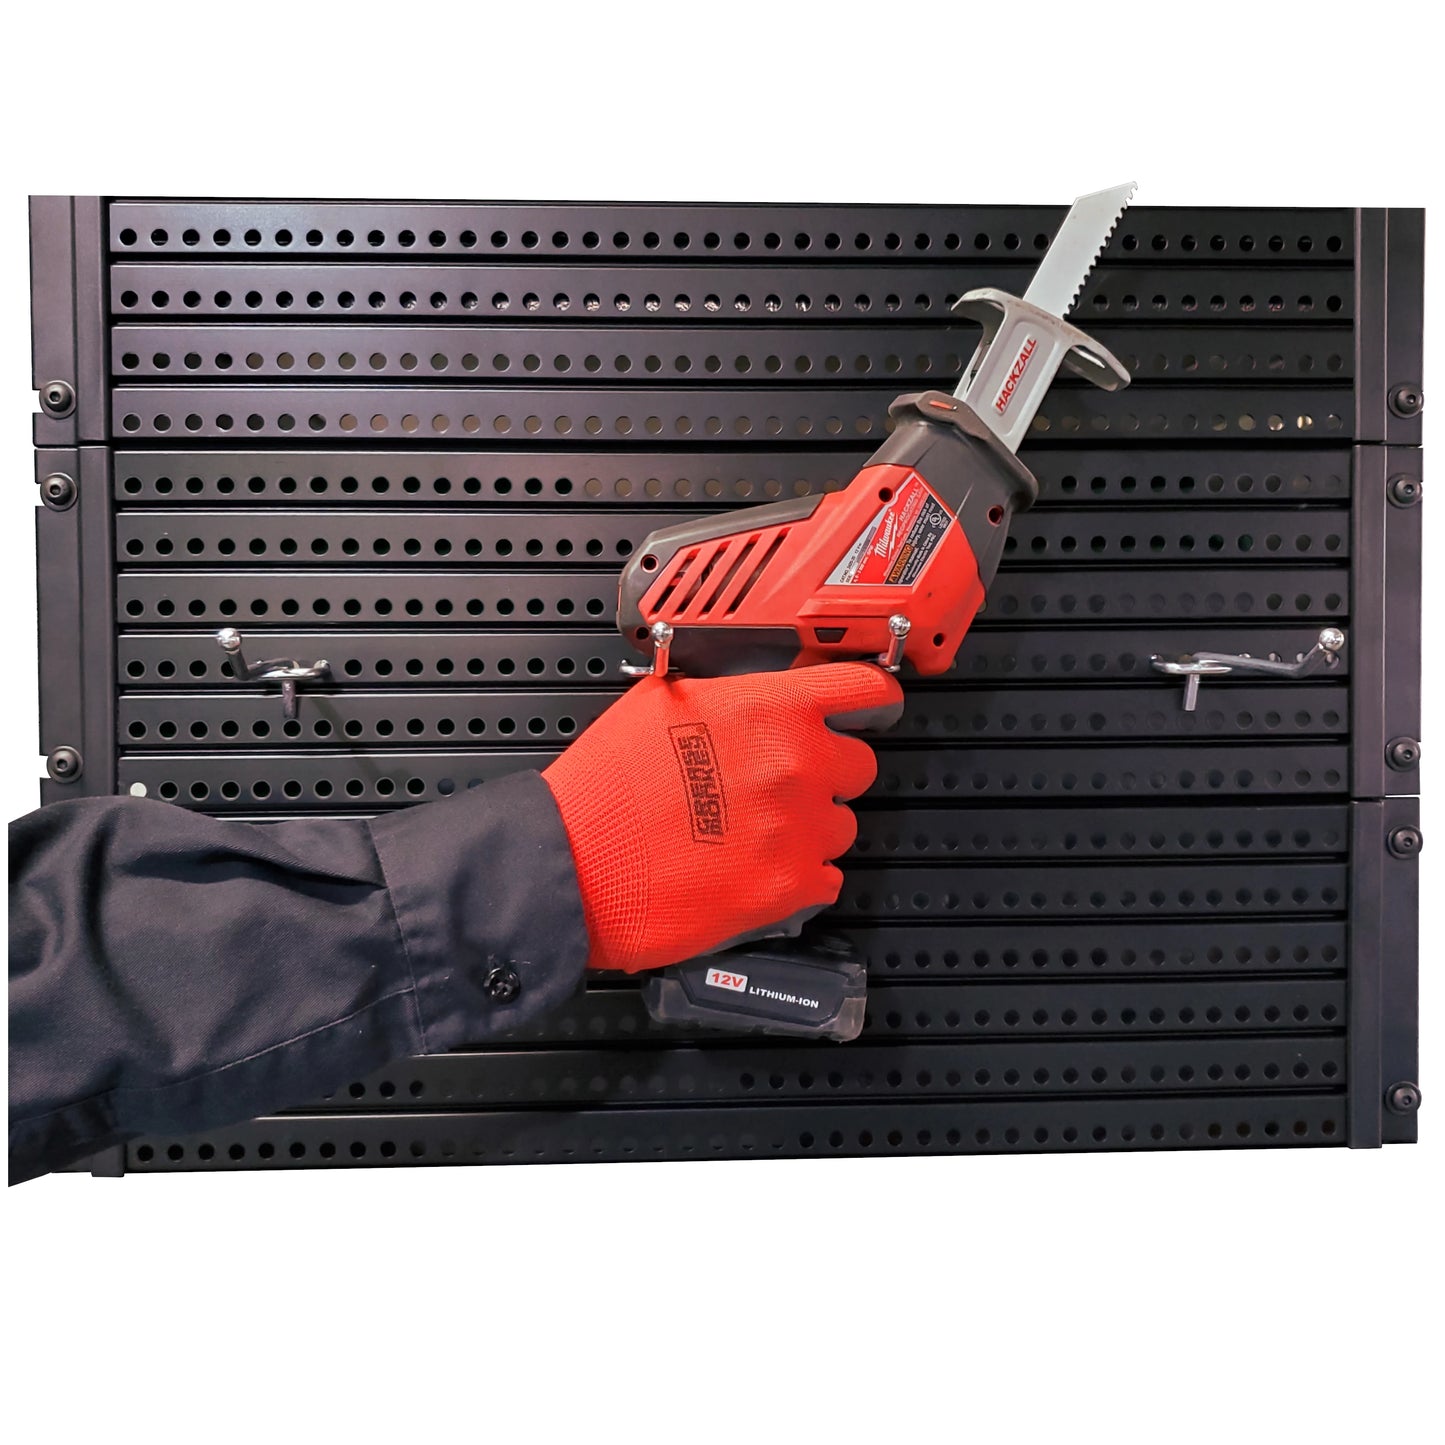 Close up image of a worker hanging a tool on a black Handypeg pegboard product.